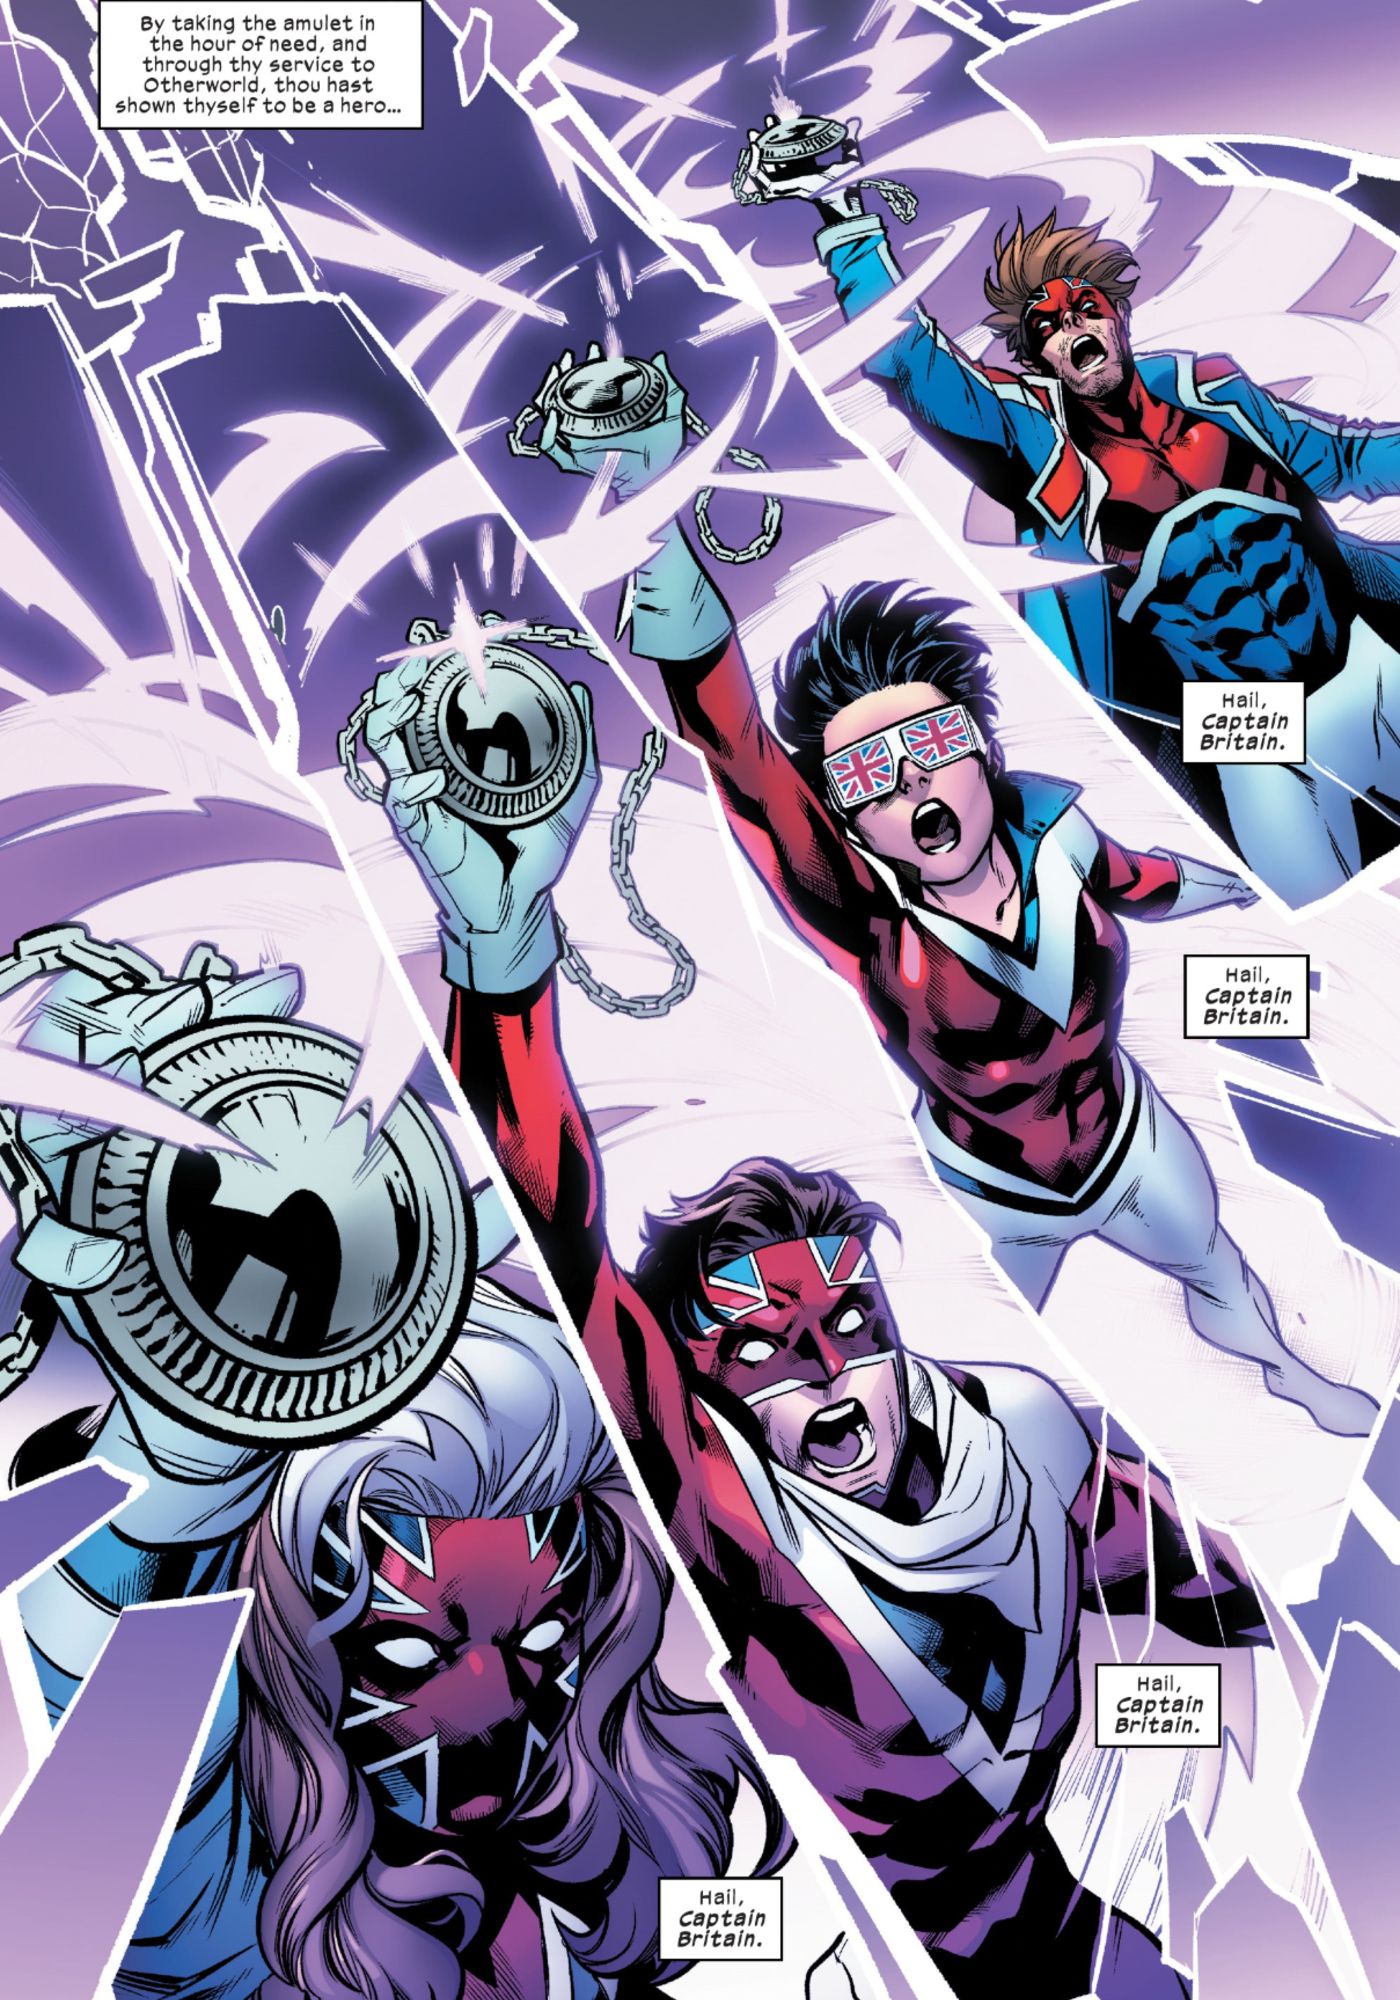 Marvel Just Rebooted The CAPTAIN BRITAIN Corps